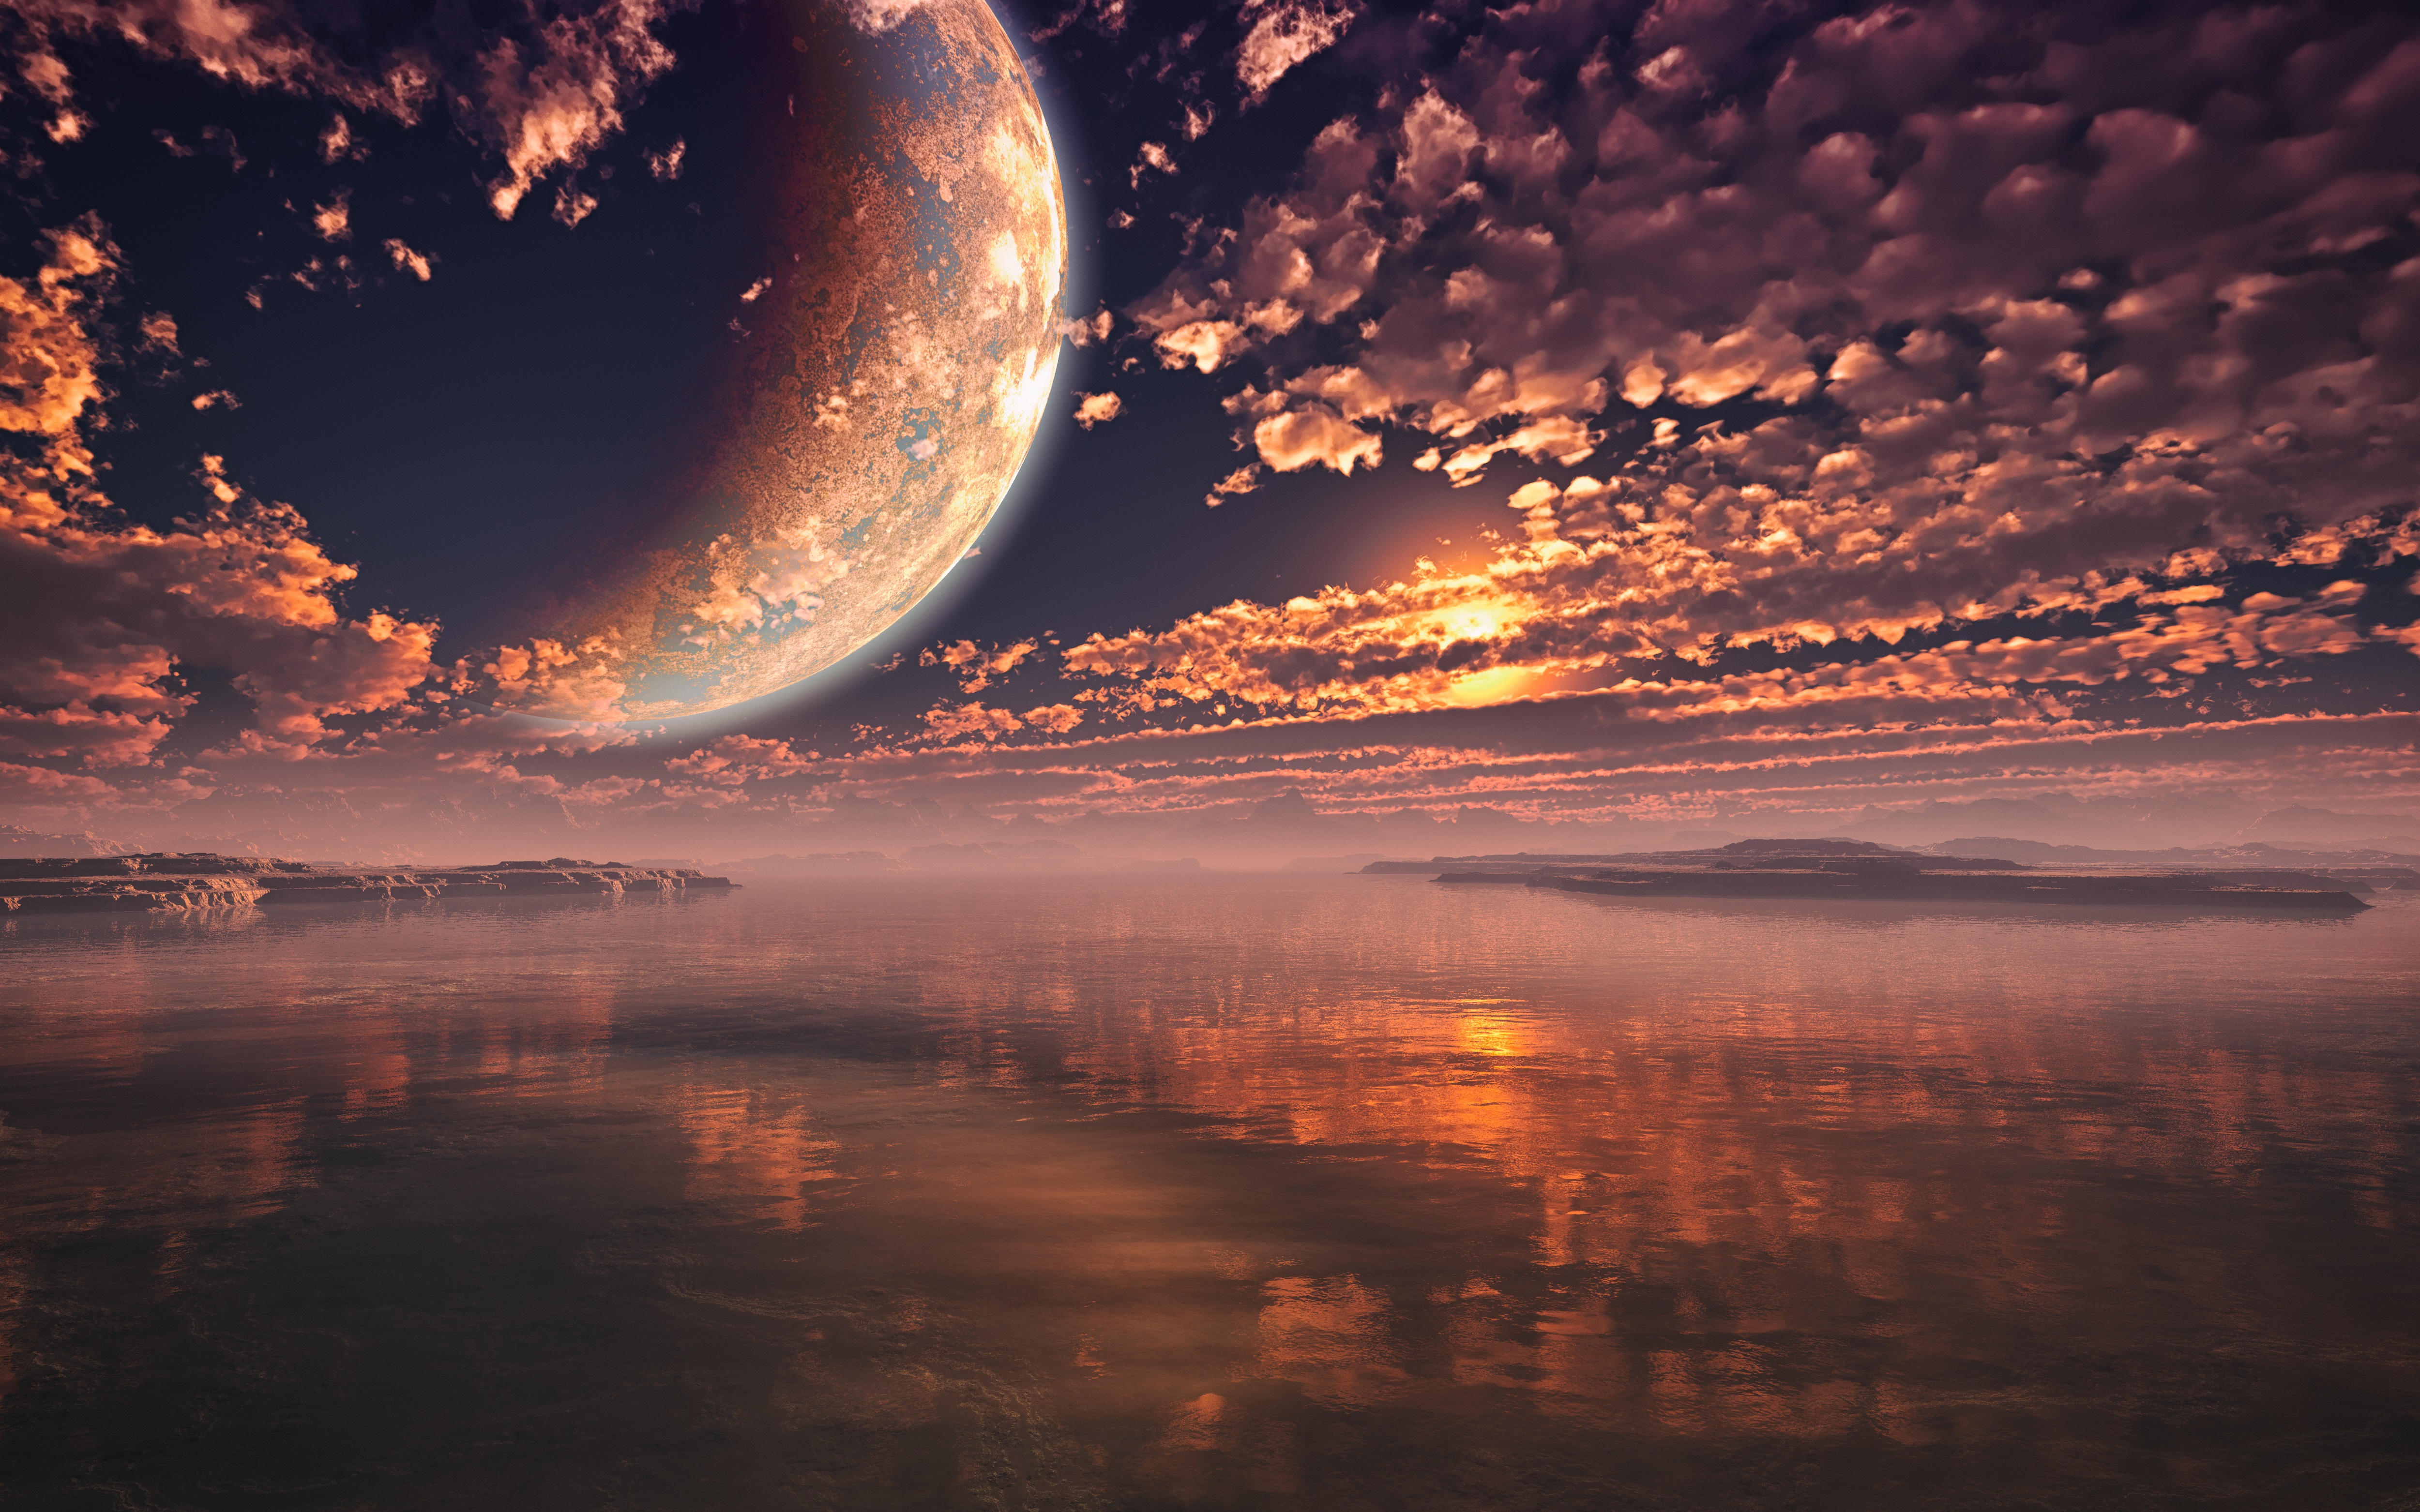 Moon Sea Water Render Reflection Clouds Sky Landscape Sunlight Sunset Lights Nature Planet Space 5000x3125